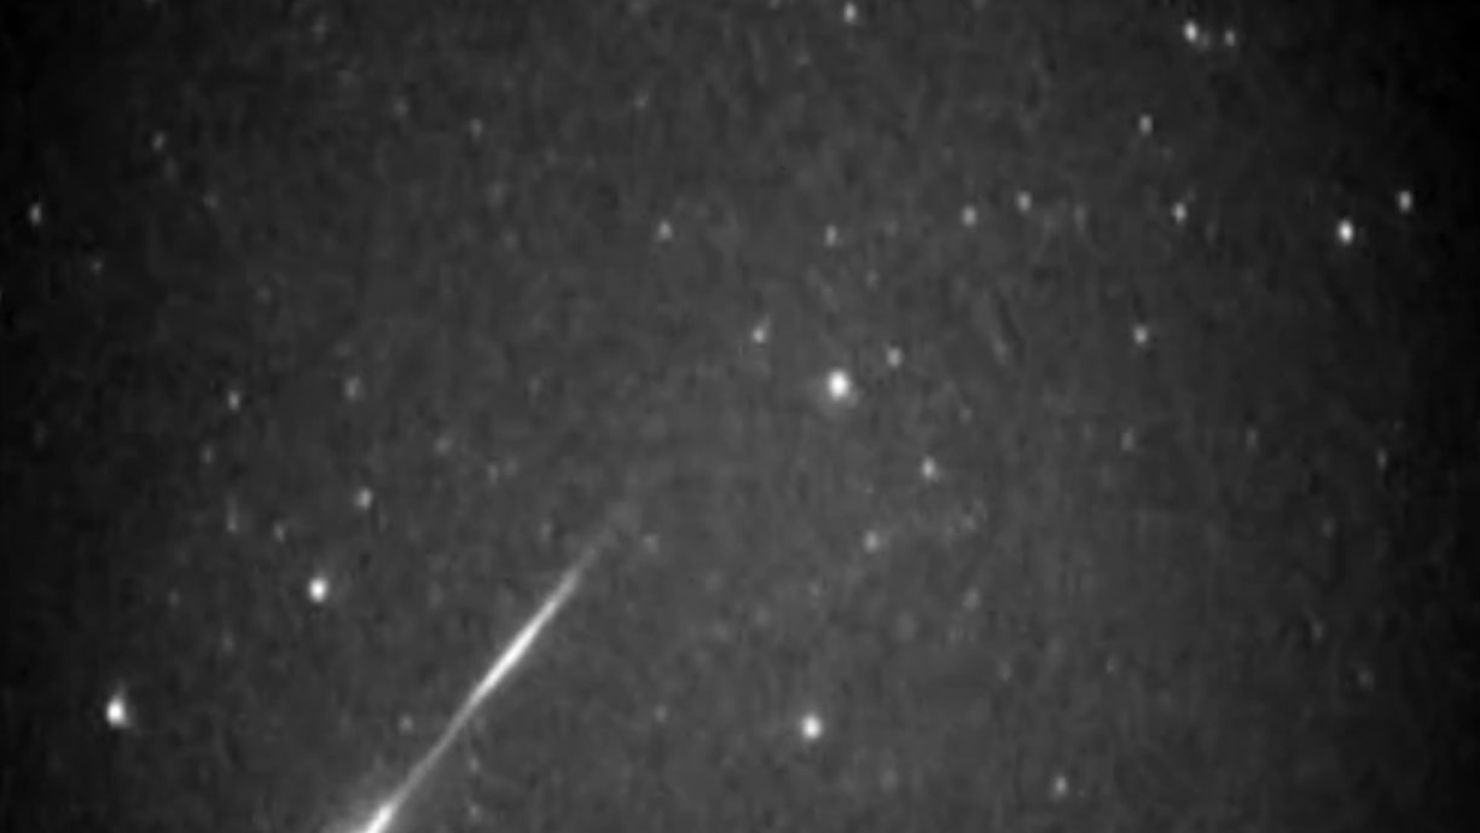 A meteor from the Leonid meteor shower streaks across the sky.